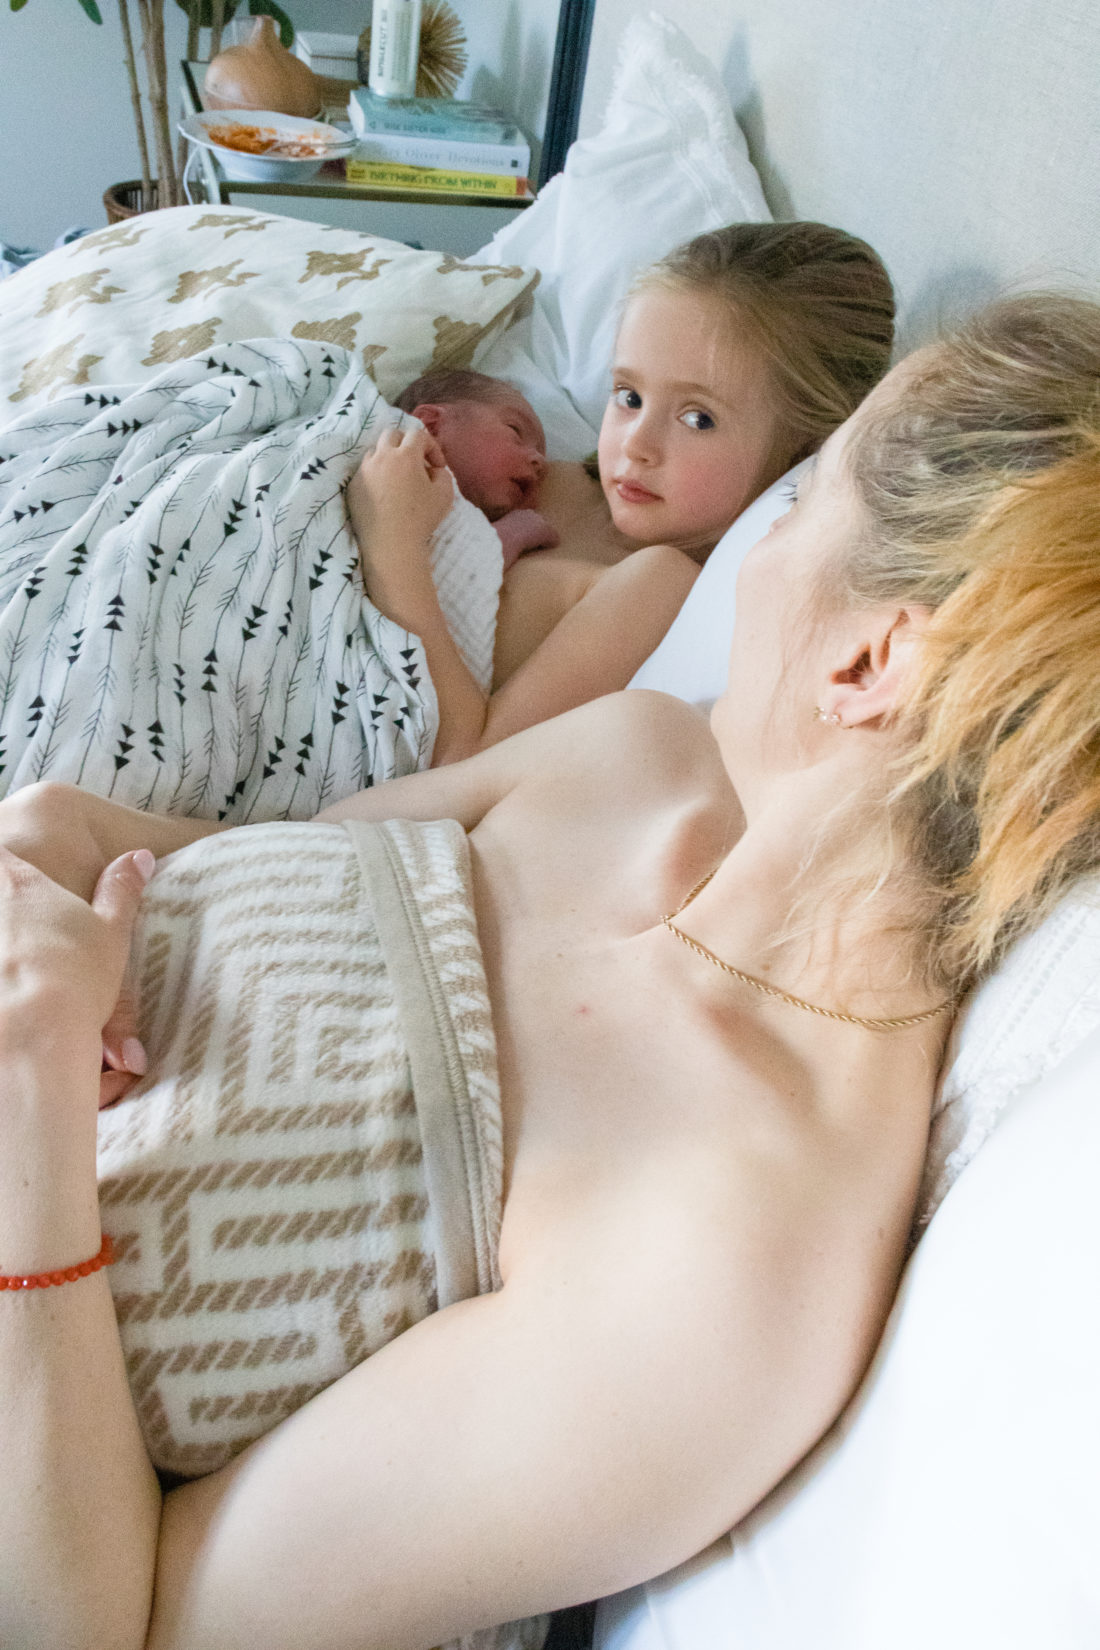 Eva Amurri shares her third son Mateo Antoni's birth story, as well as personal photos from his birth